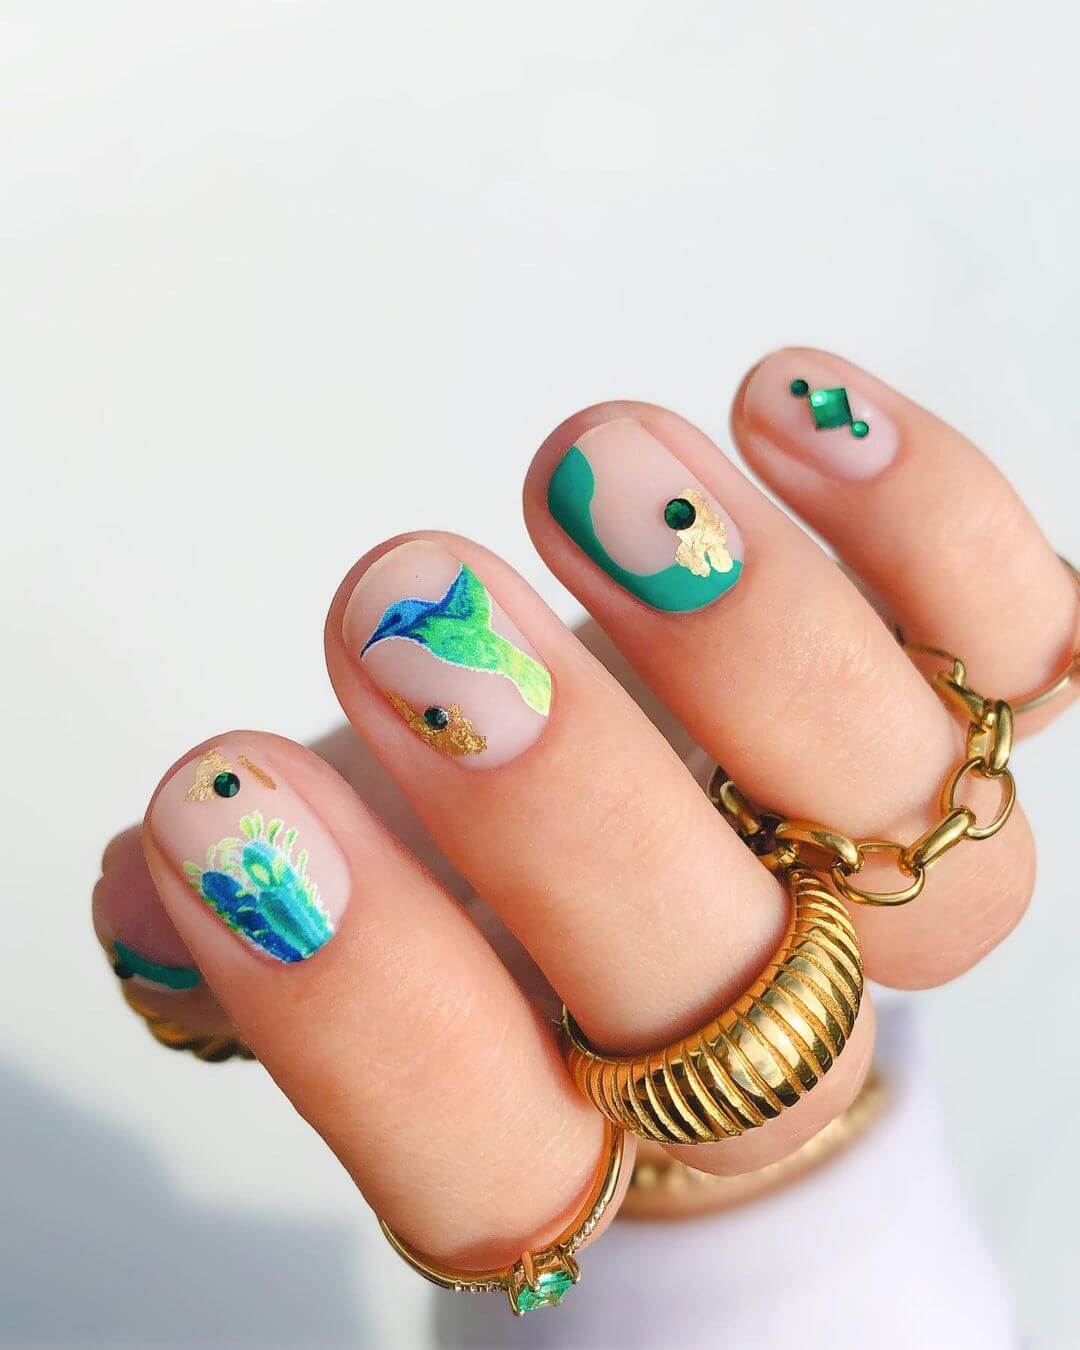 Summer Nail Art Designs Tropical blend of colors with a kingfisher Nail Art